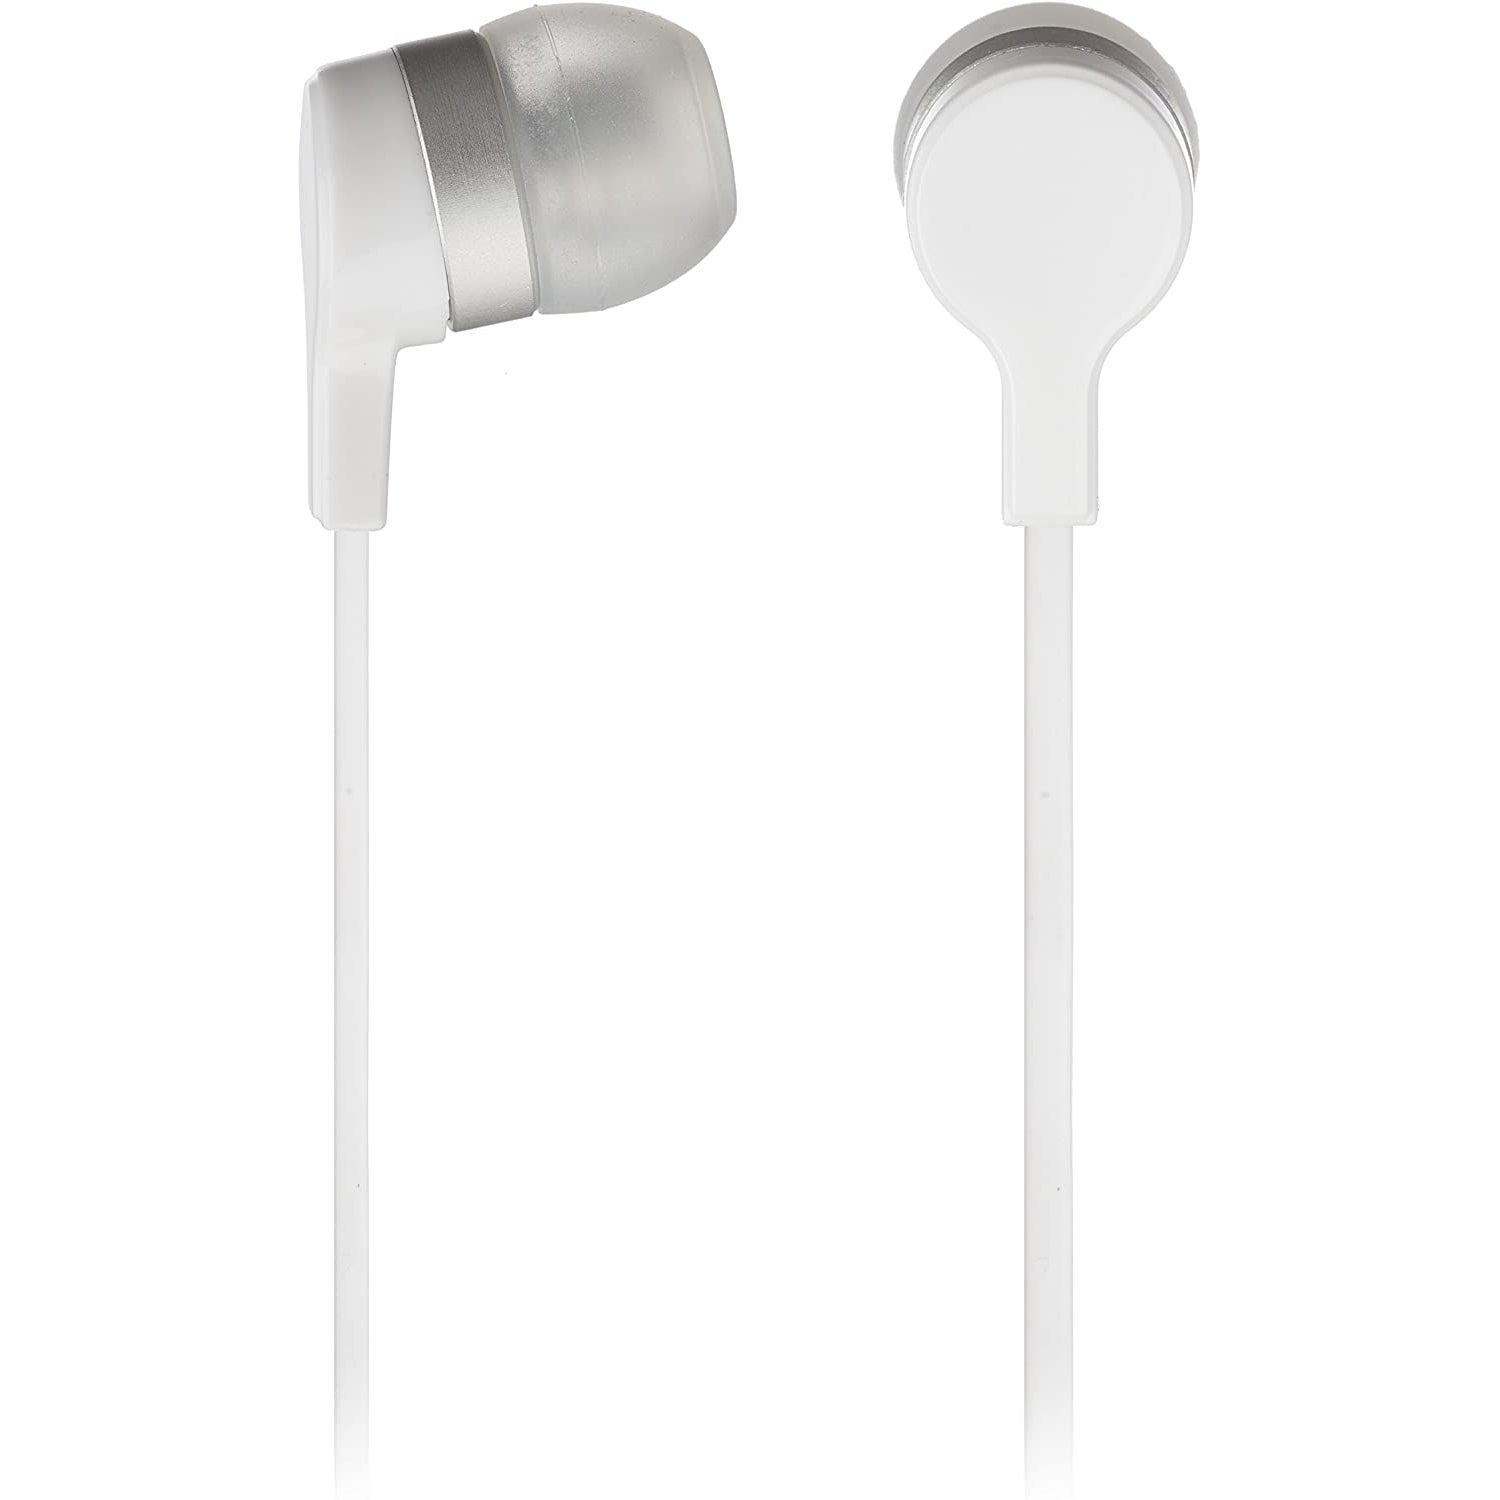 KitSound Mini In-Ear Headphones with In-Line Mic - White - Refurbished Good